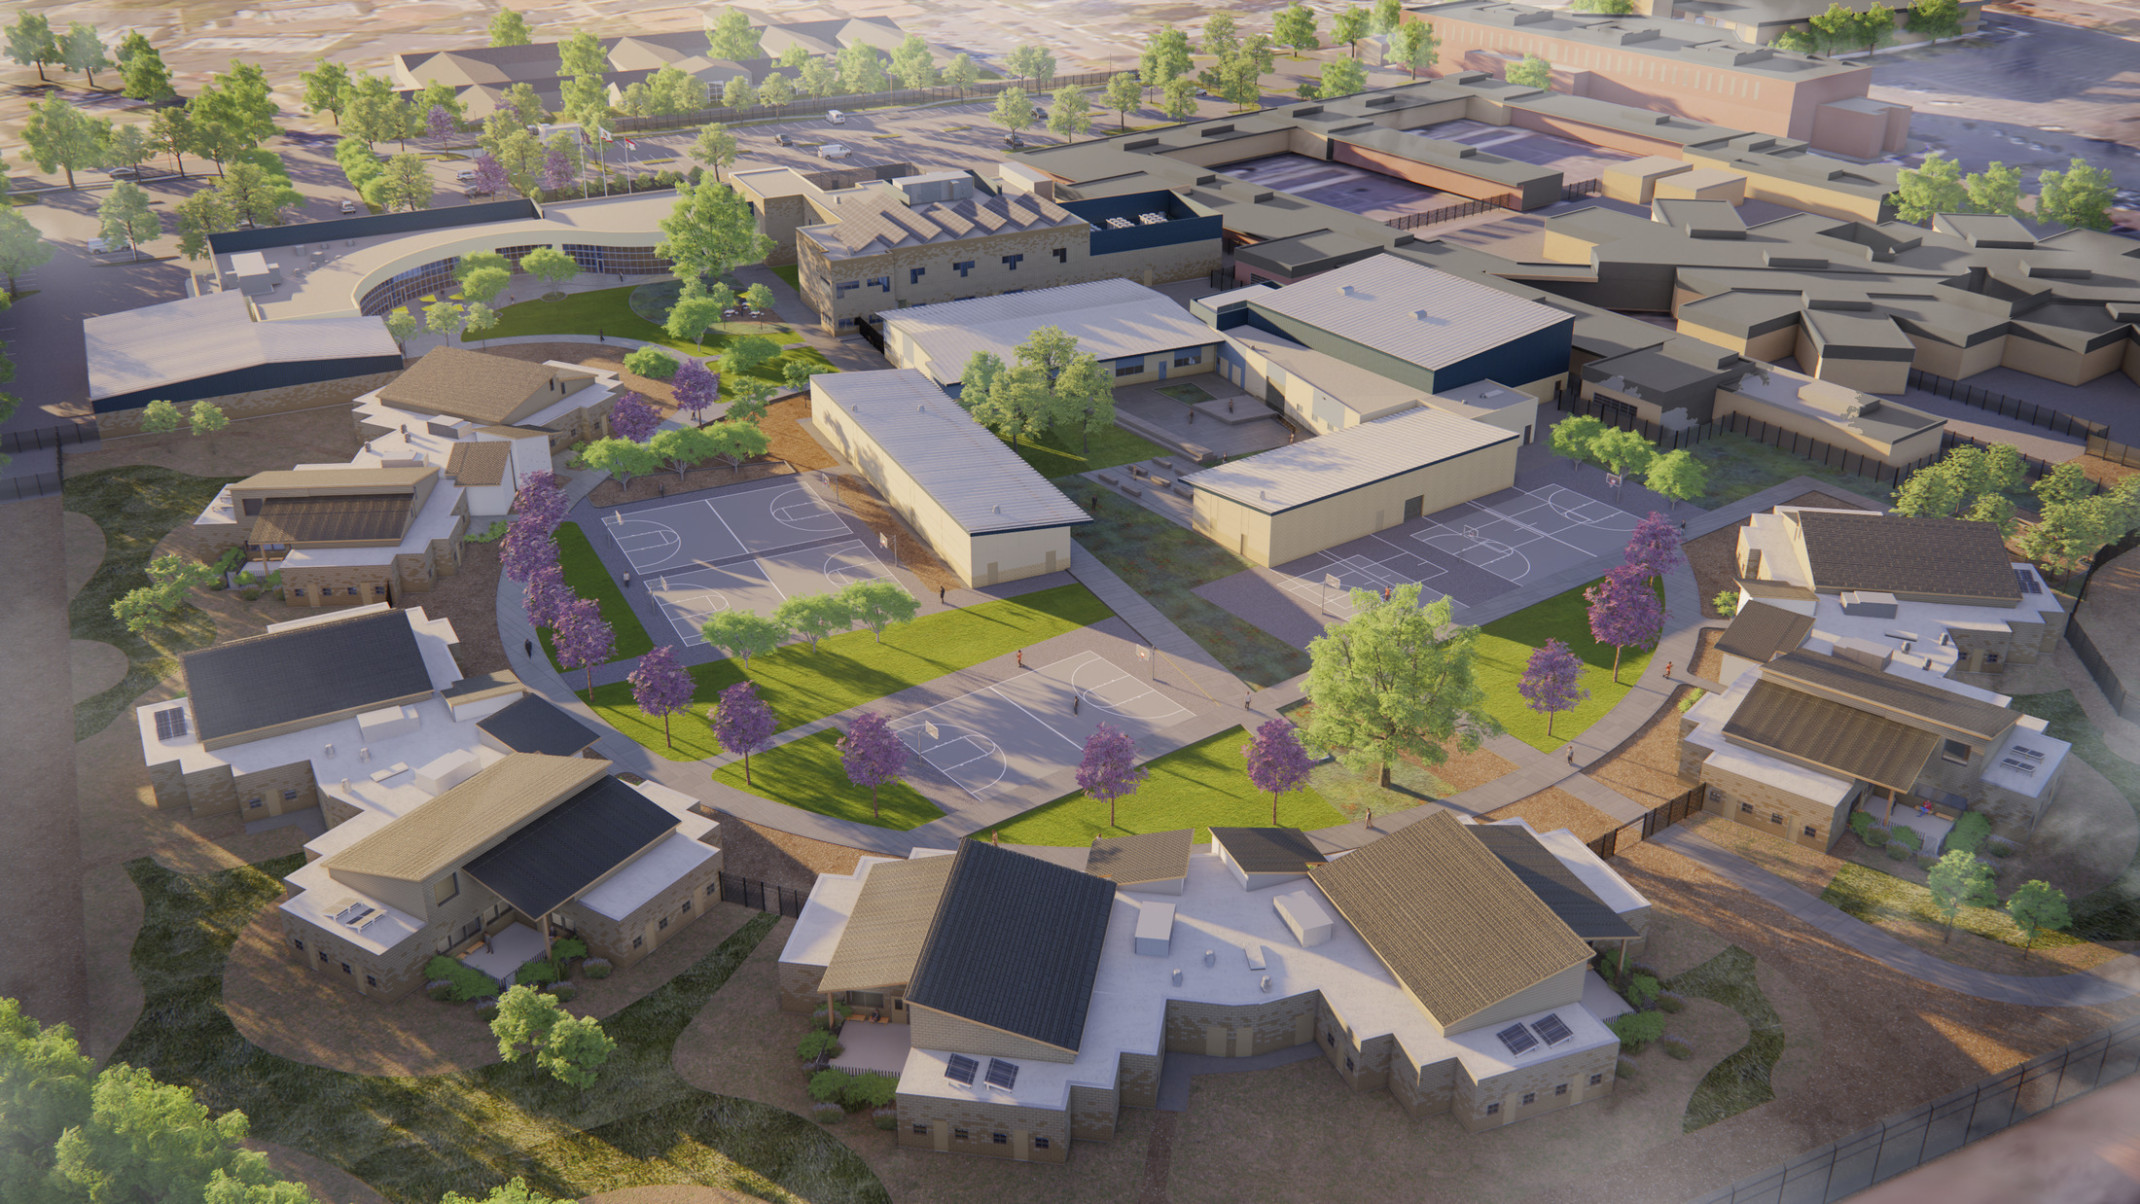 San Diego Youth Transition Campus aerial site rendering with arc of buildings surrounding courtyard with basketball courts